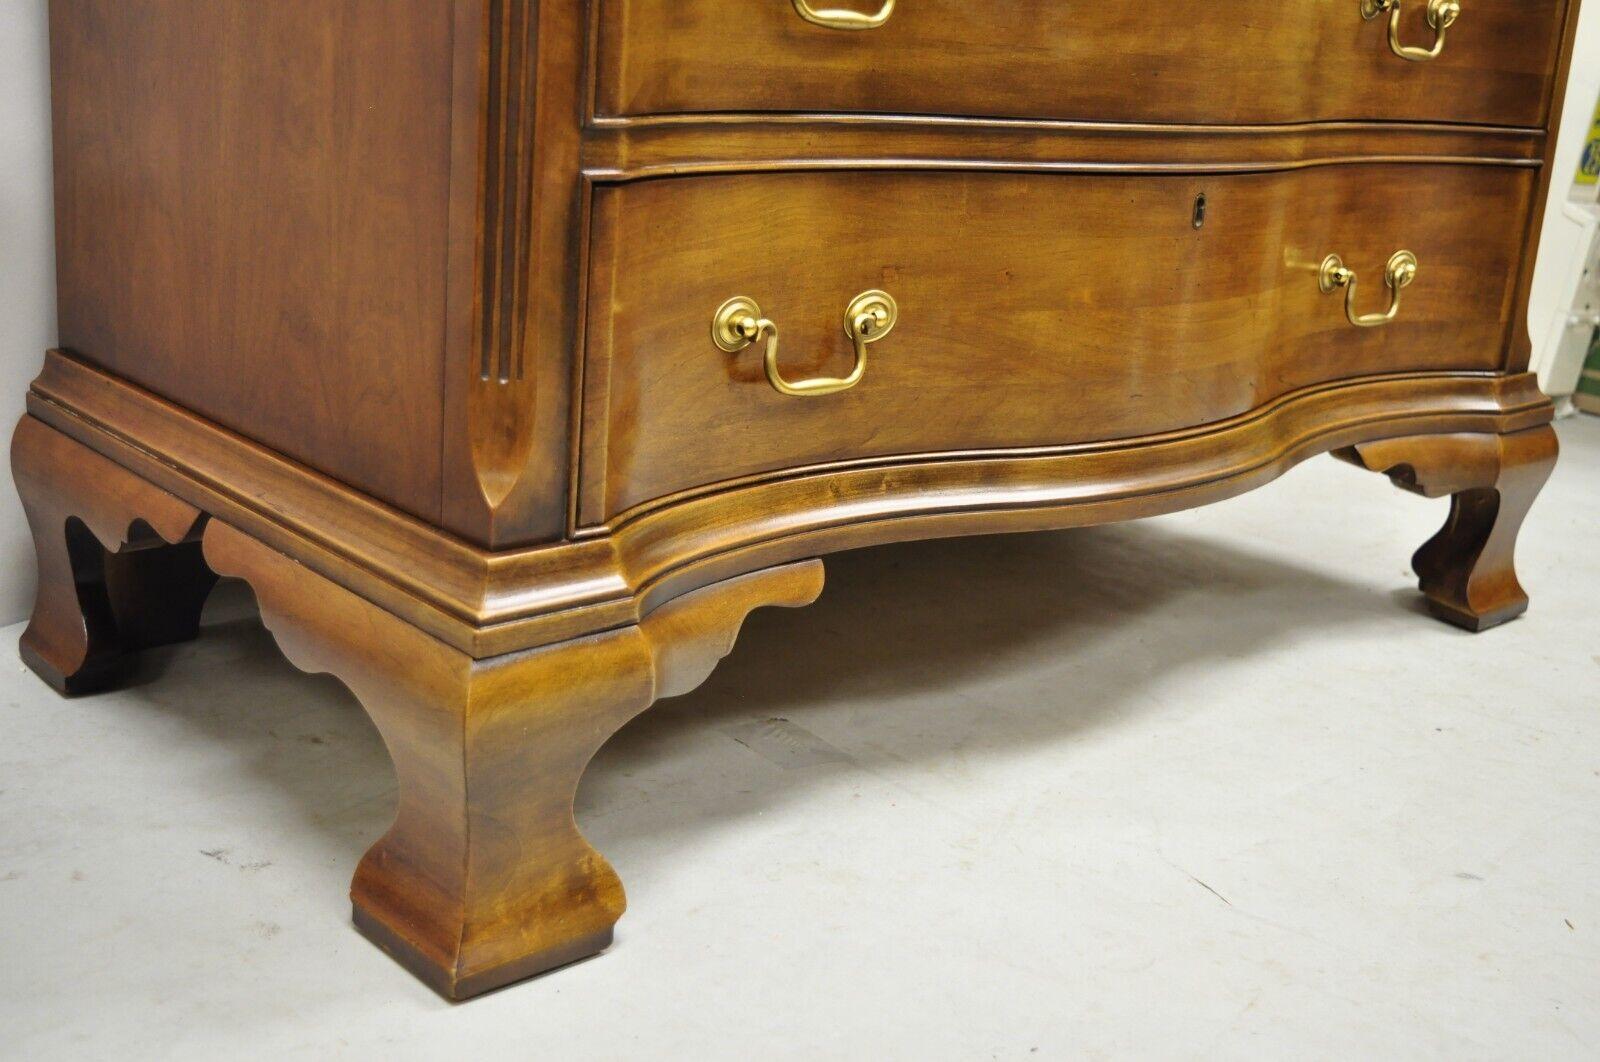 20th Century Century Furn, American Life Collection Henry Ford Museum Cherry 4 Drawer Chest